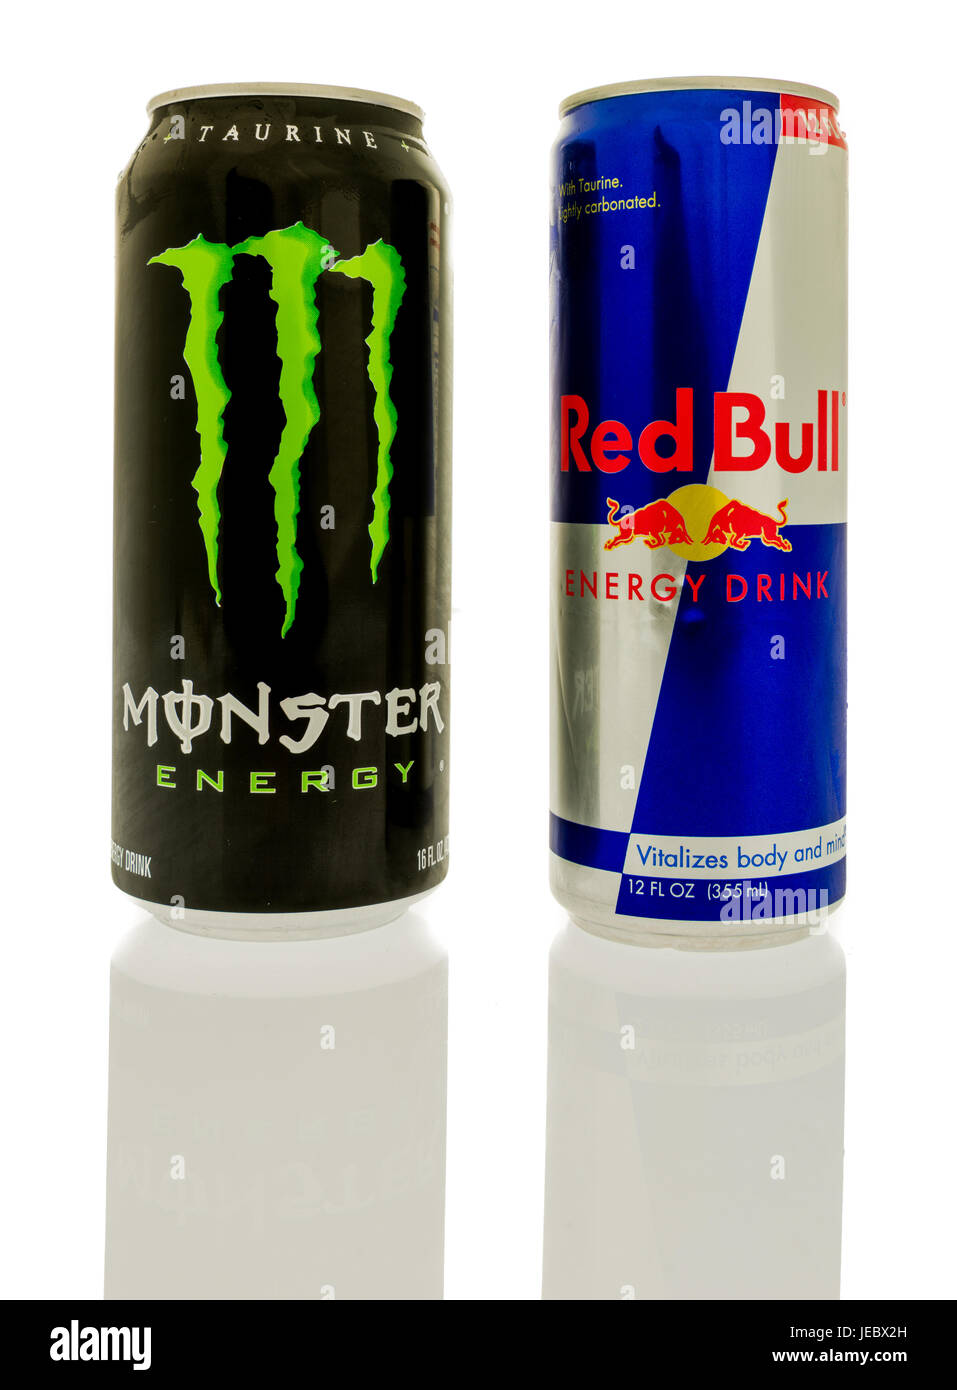 Winneconne, WI -17 June 2017: Cans of Red Bull and Monster energy drinks, the top two selling energy drinks in the world, on an isolated background Stock Photo